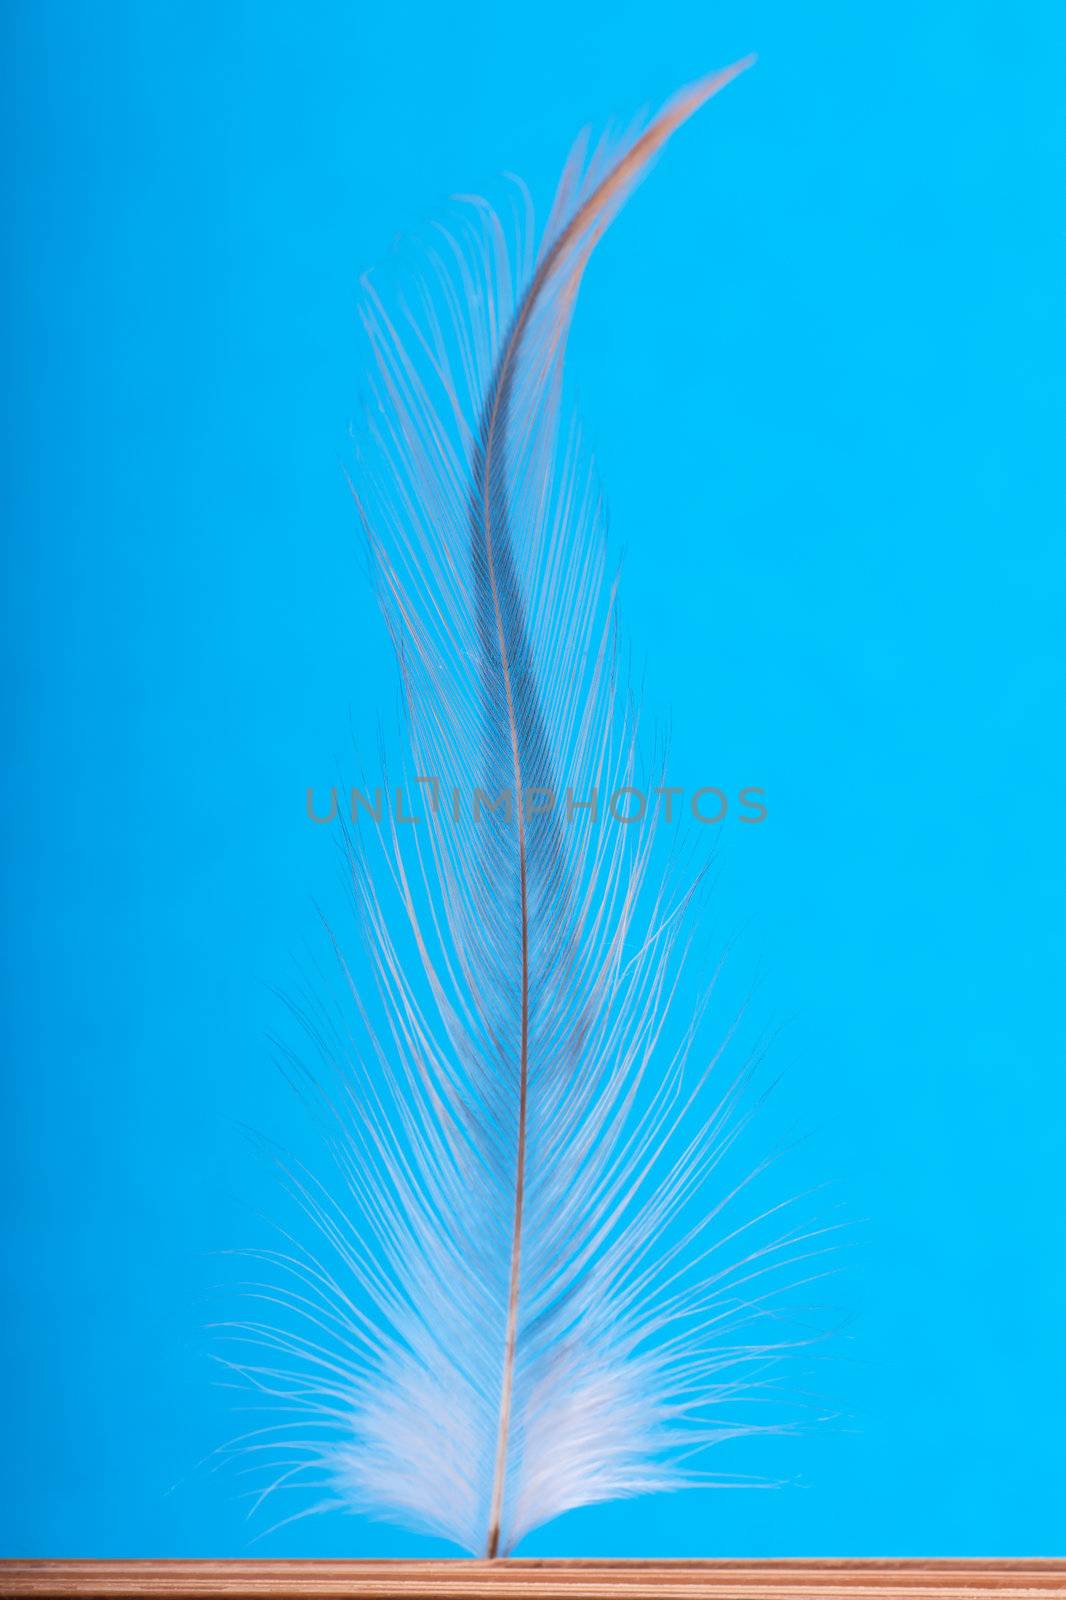 Feather by AGorohov